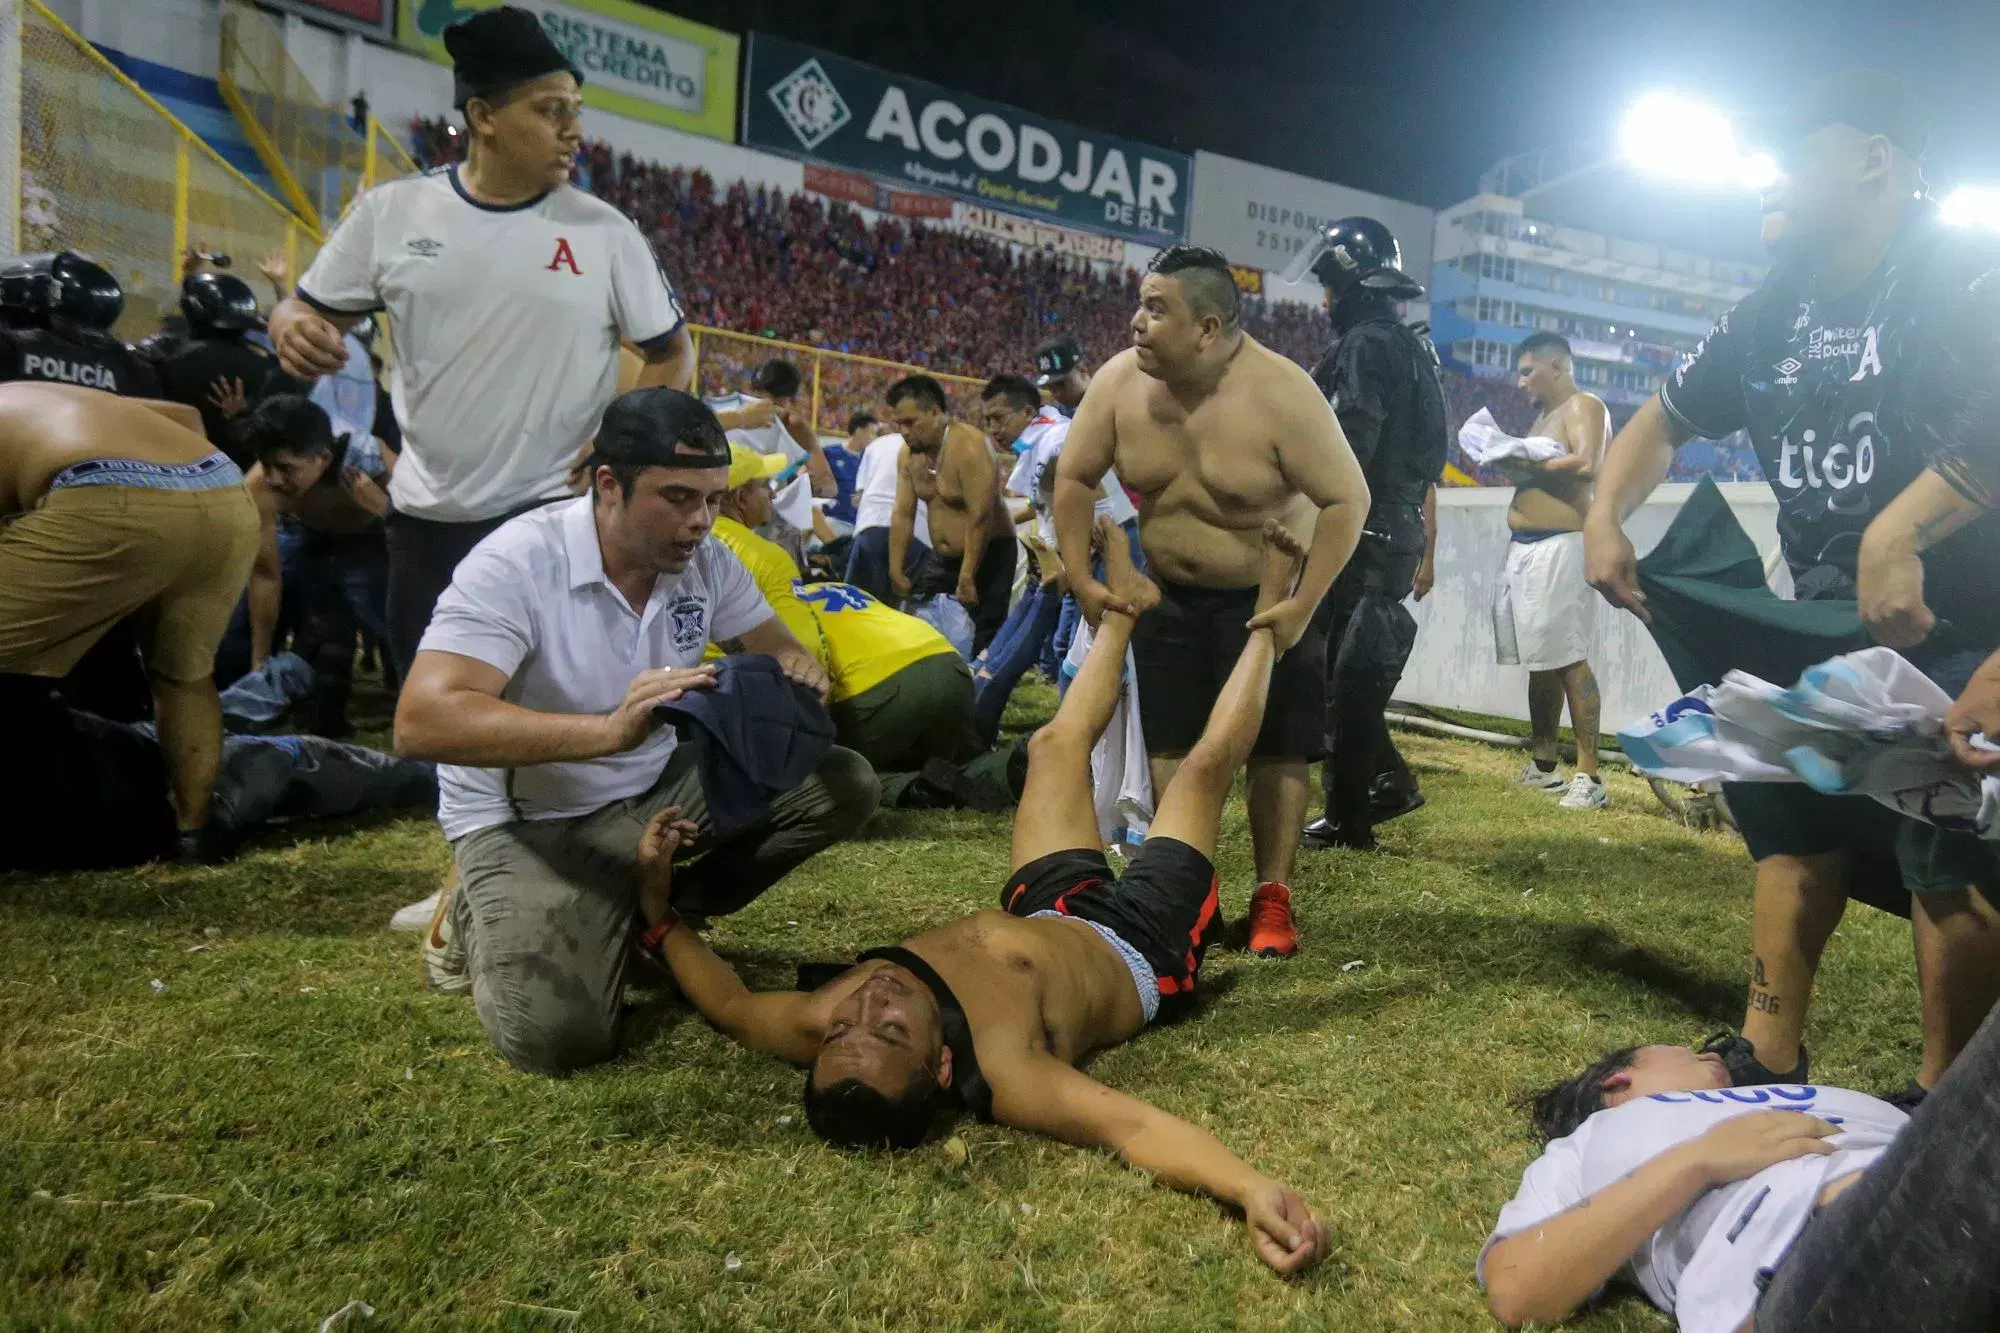 Football riots in El Salvador, the death toll rises to 12 people